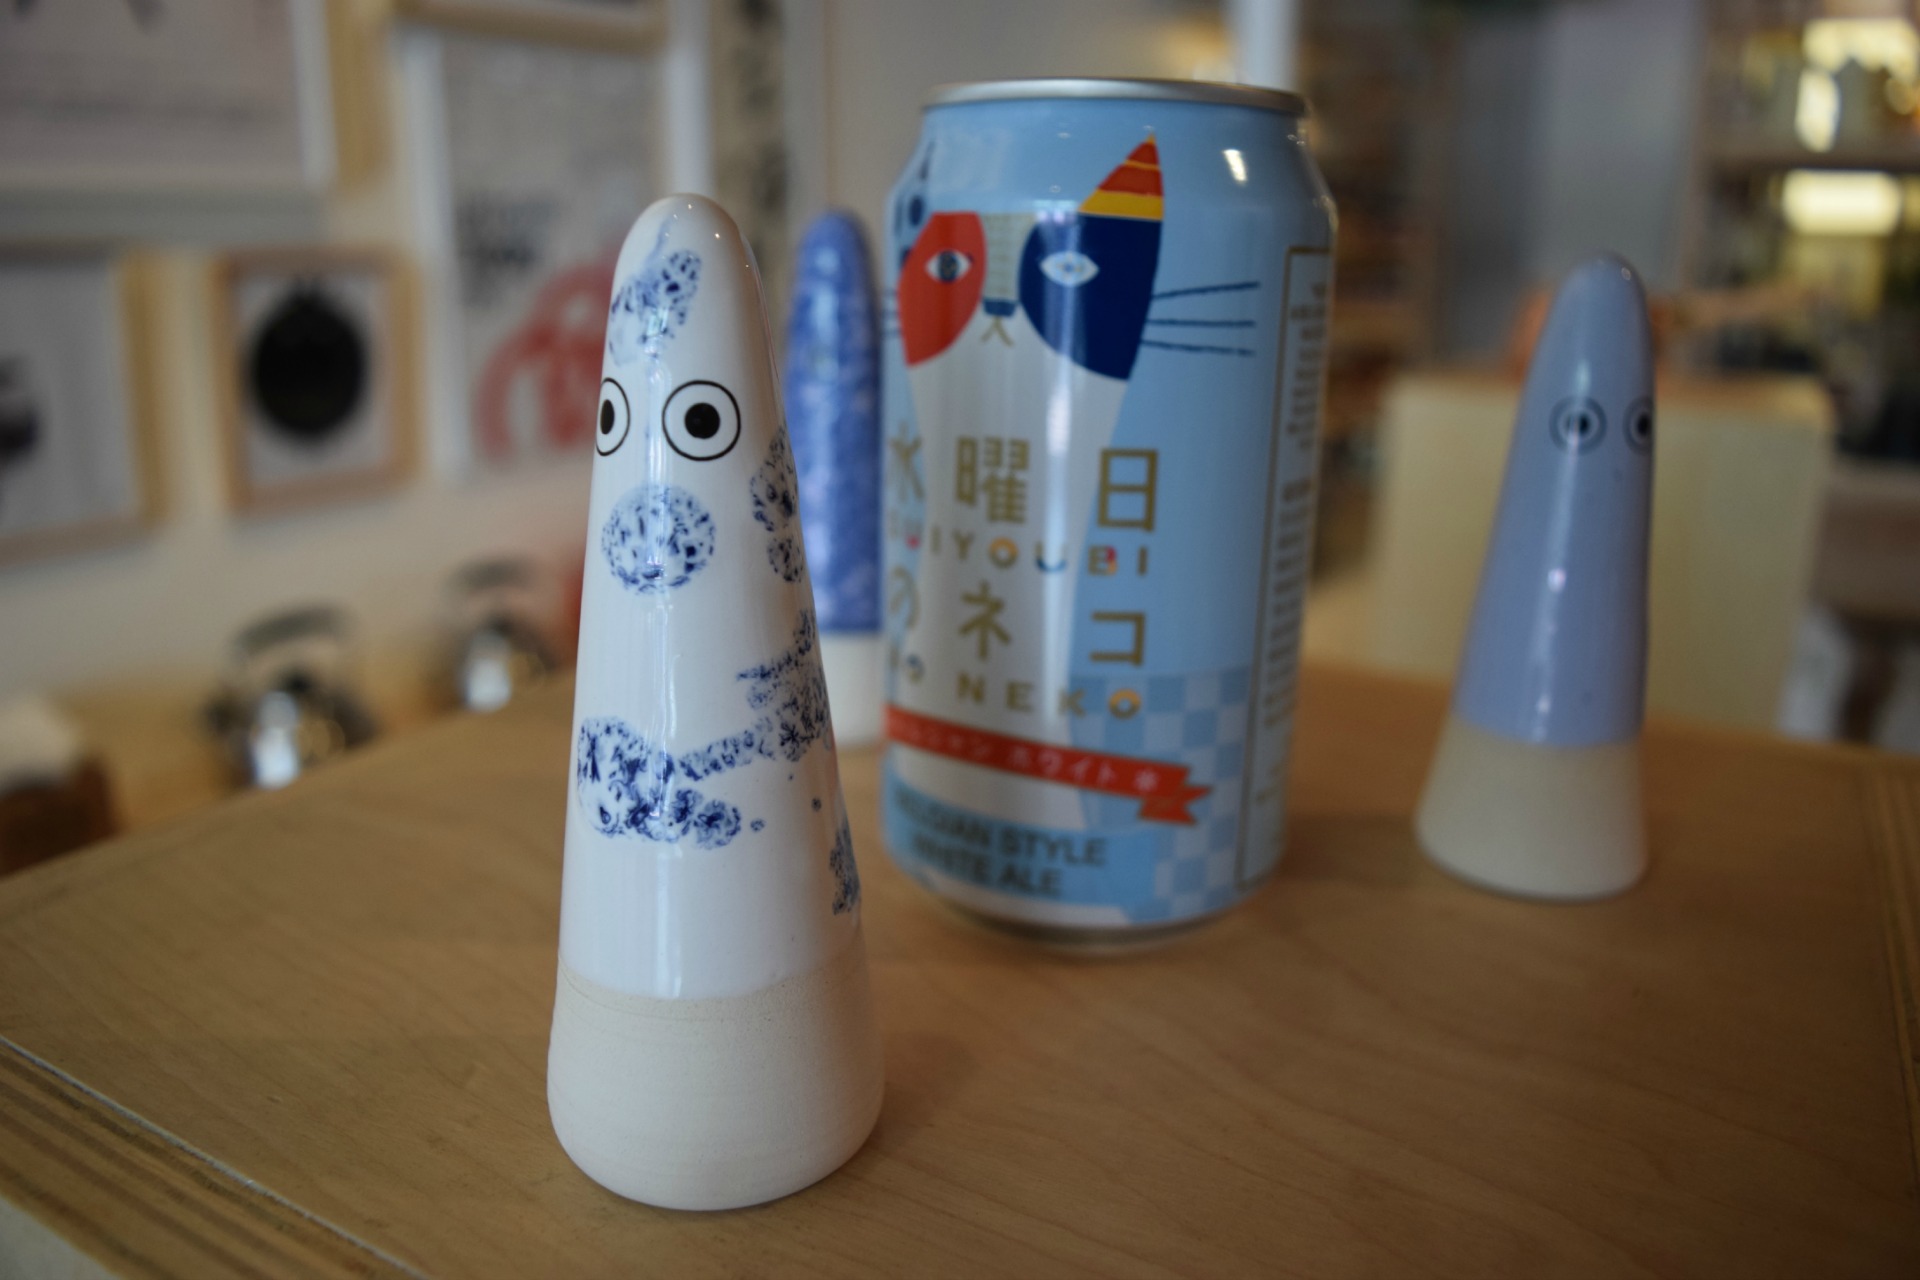 Ceramic ghosts protect the Wednesday Cat beer.